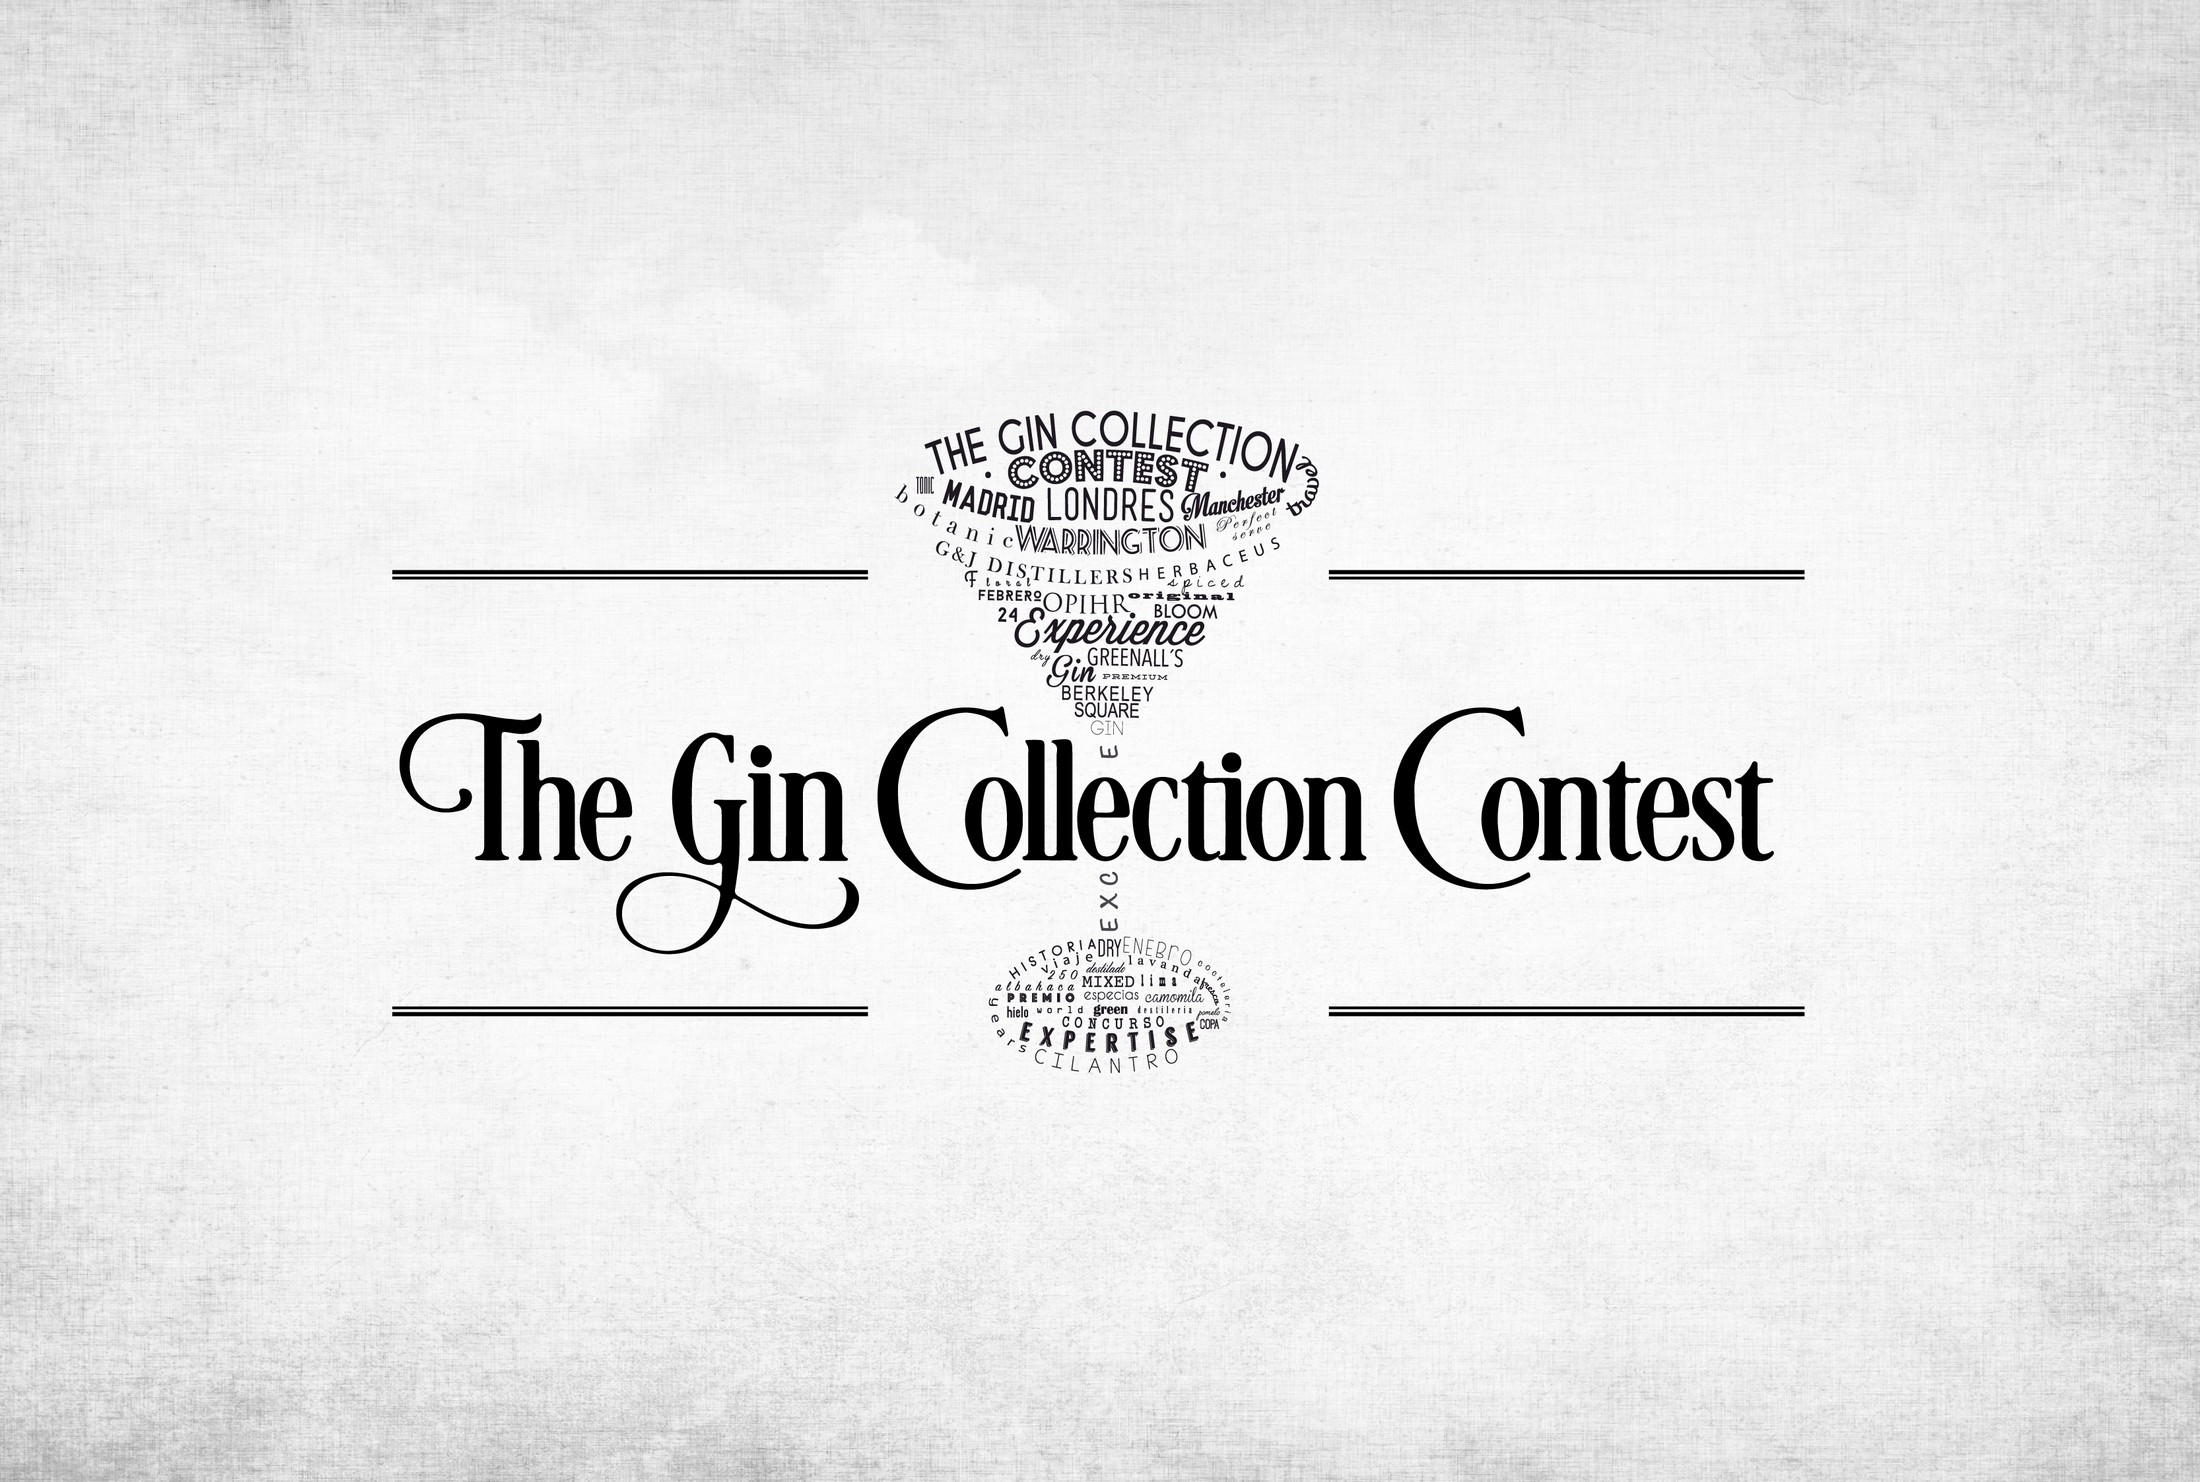 THE GIN COLLECTION CONTEST 2016